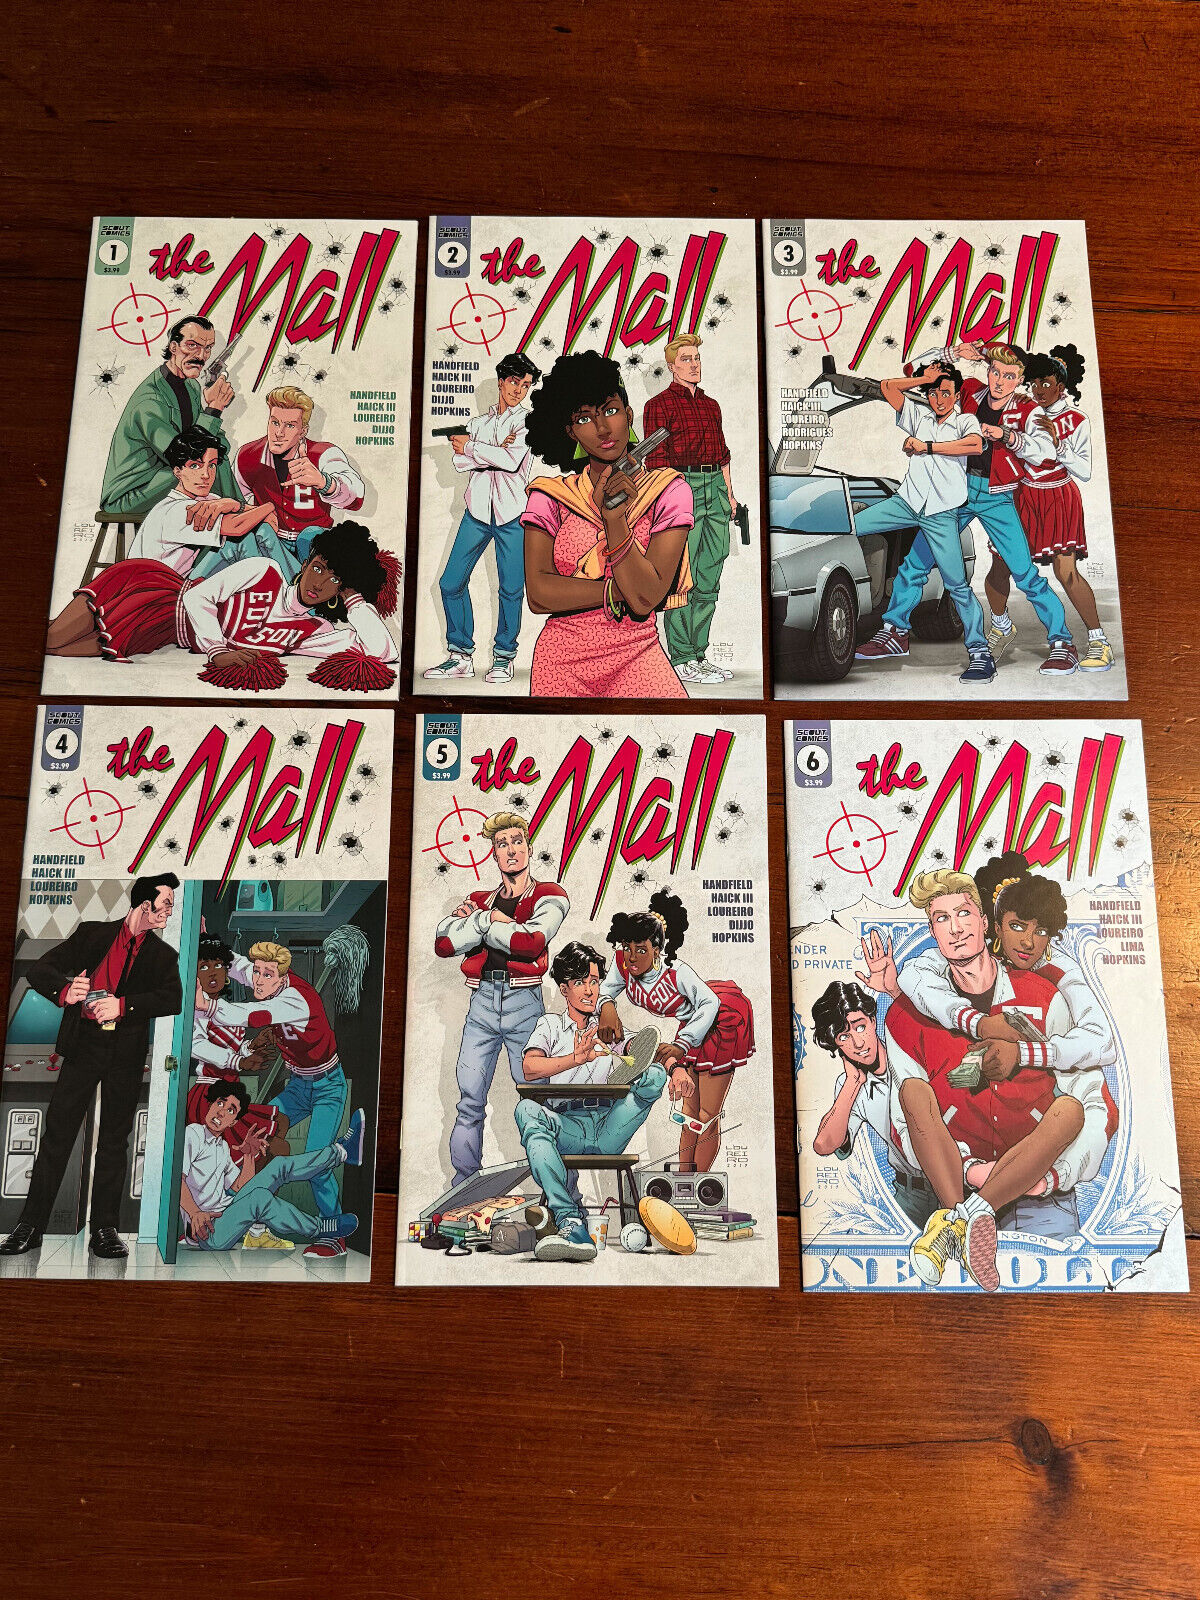 The Mall-Scout Comics-Issues #1-6-Complete Set-Very Nice-Fast Shipping